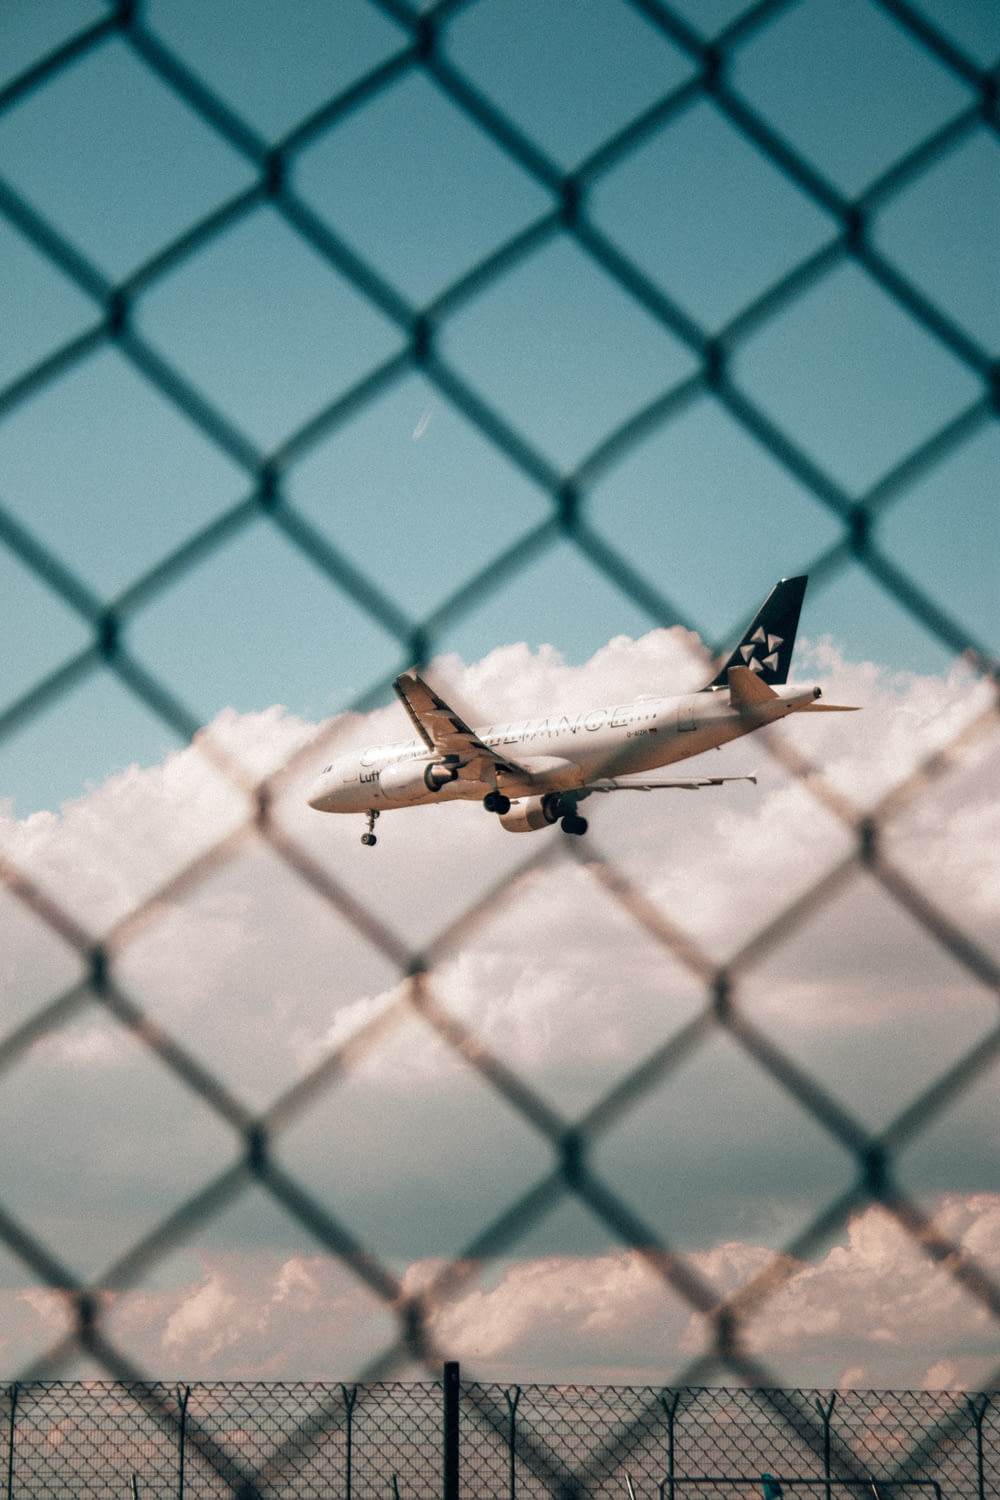 a plane is flying in the sky behind a chain link fence